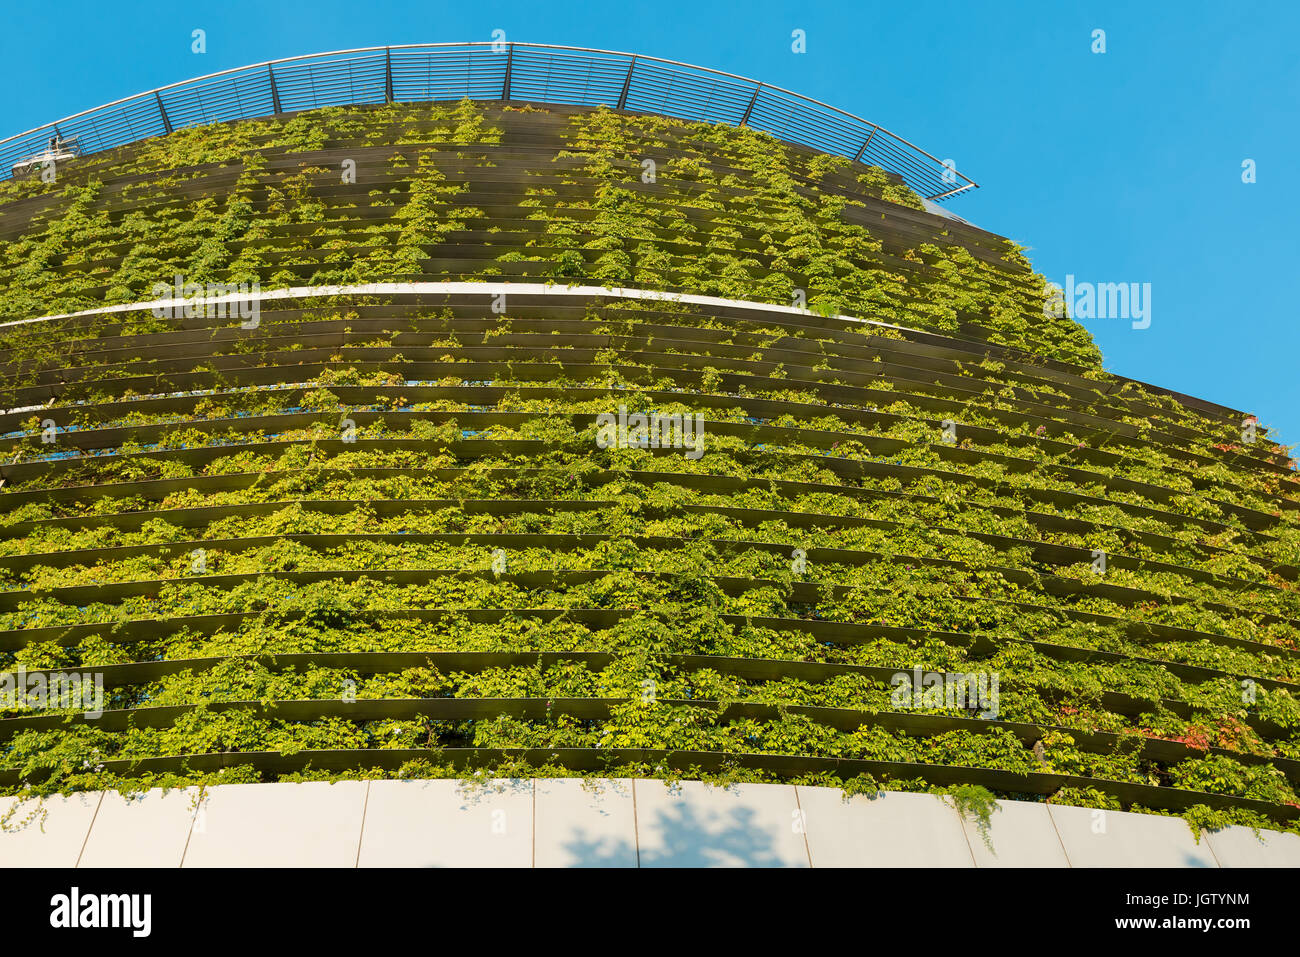 Santiago, Region Metropolitana, Chile - The Consorcio building, the first building with a green ecological façade in Chile, located Stock Photo